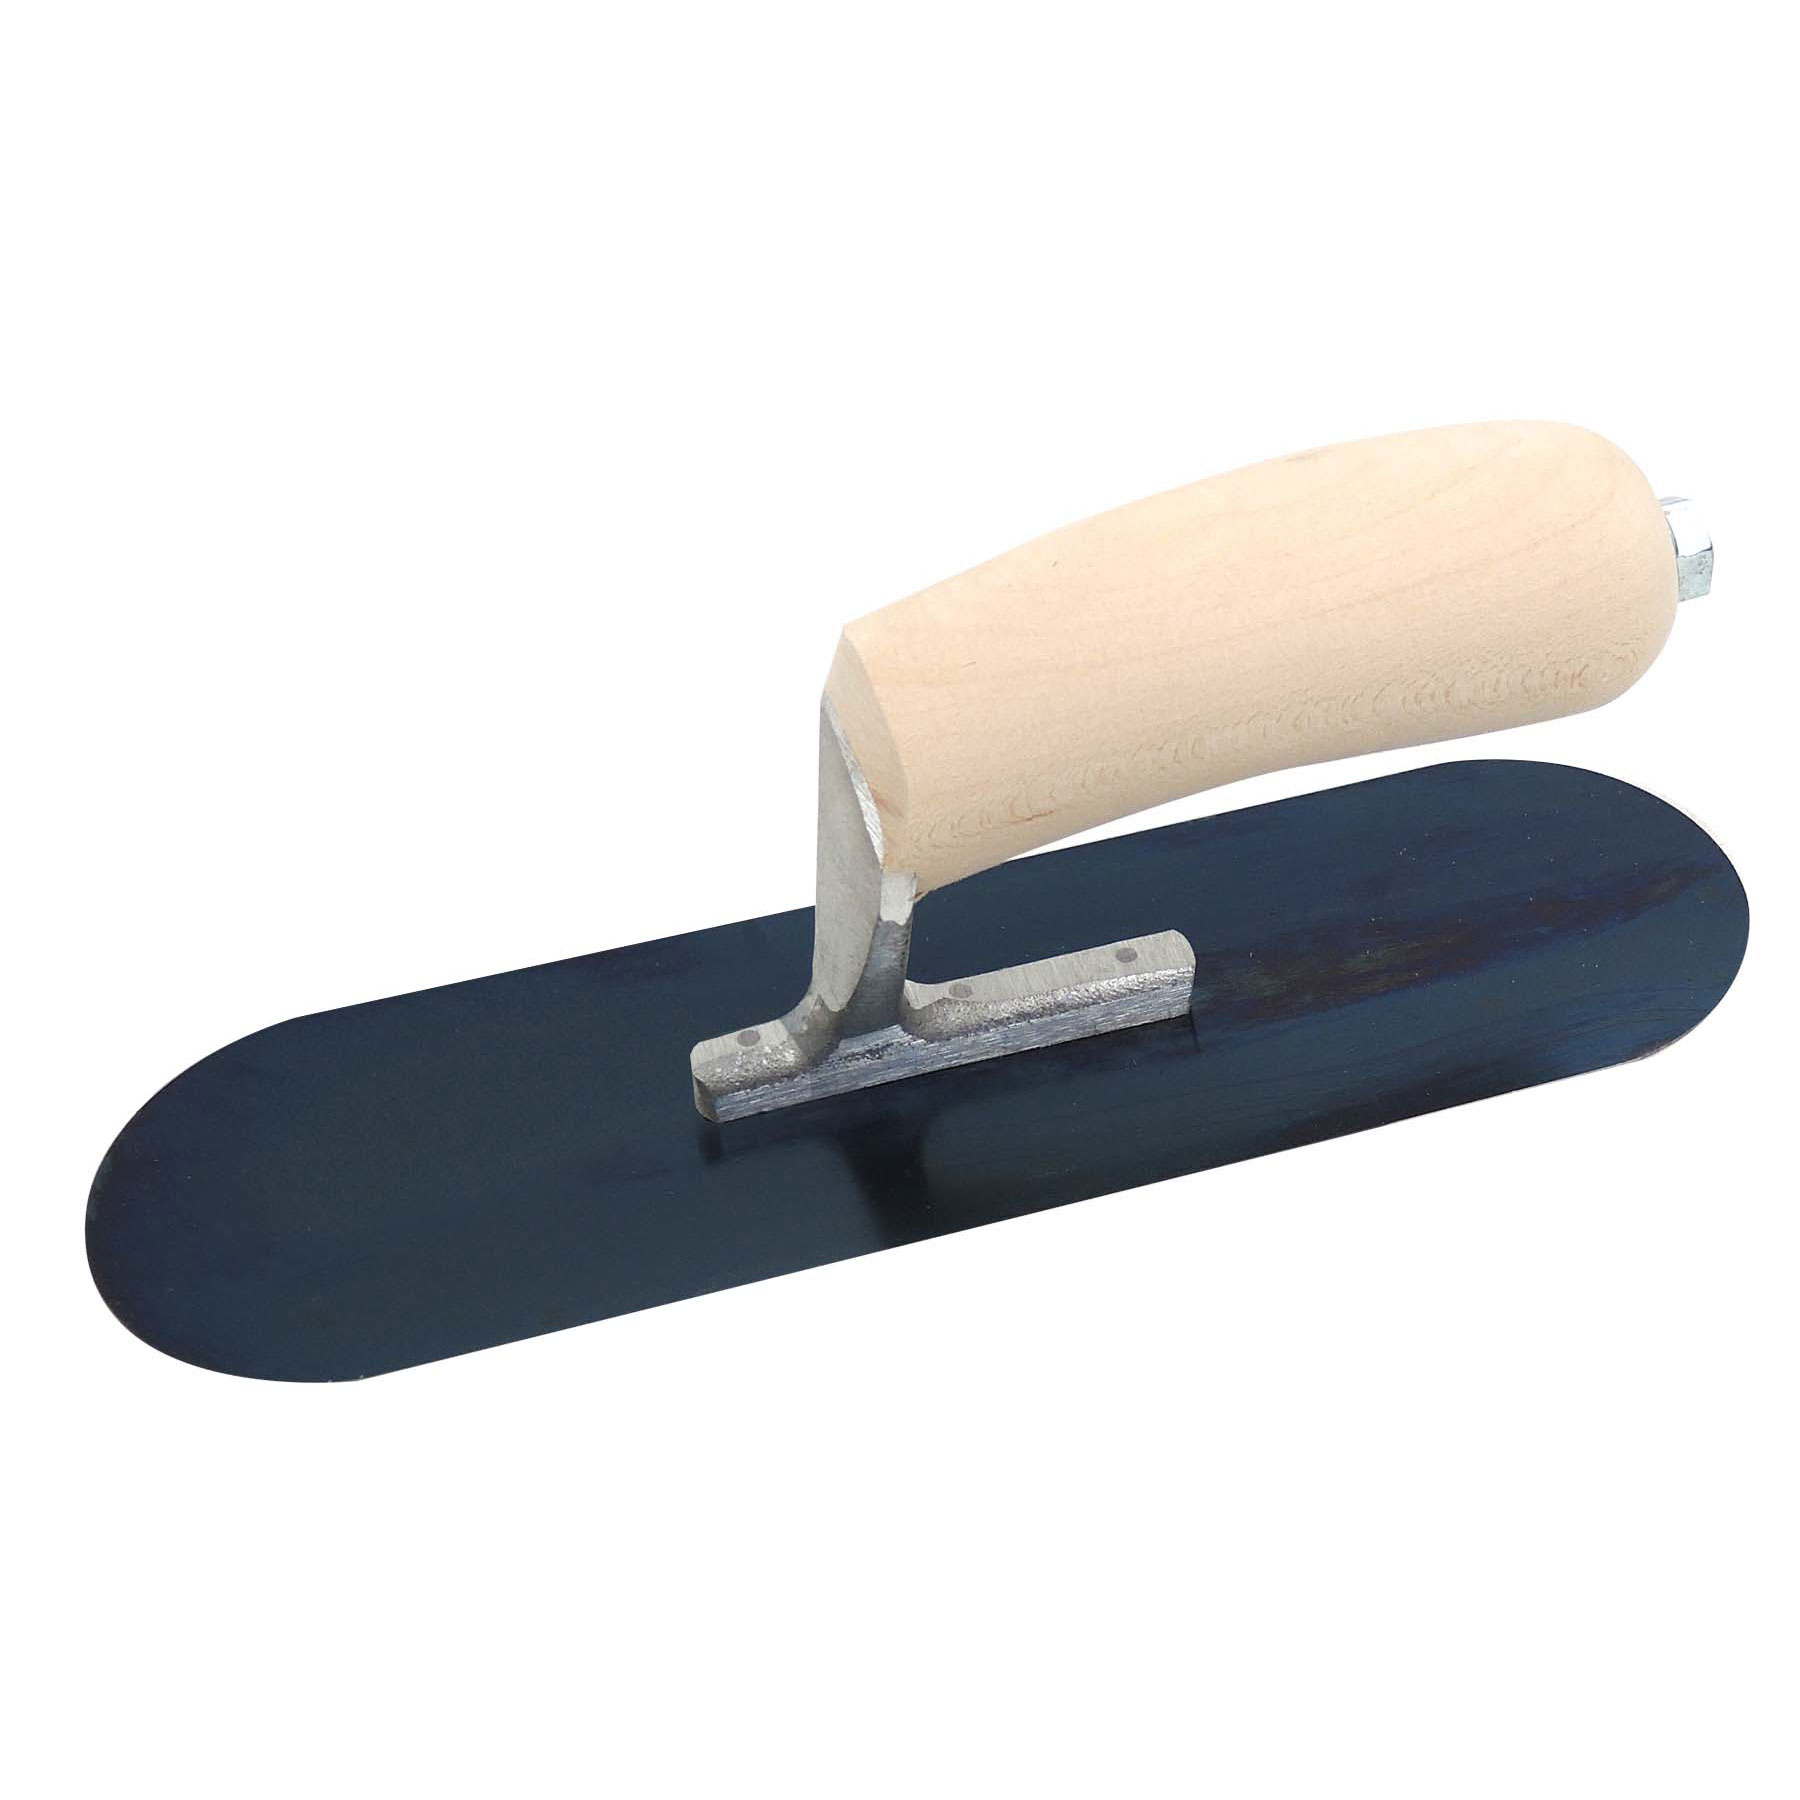 Marshalltown SP143SS 14in x 3in Stainless Steel Pool Trowel with Wood Handle SP143SS